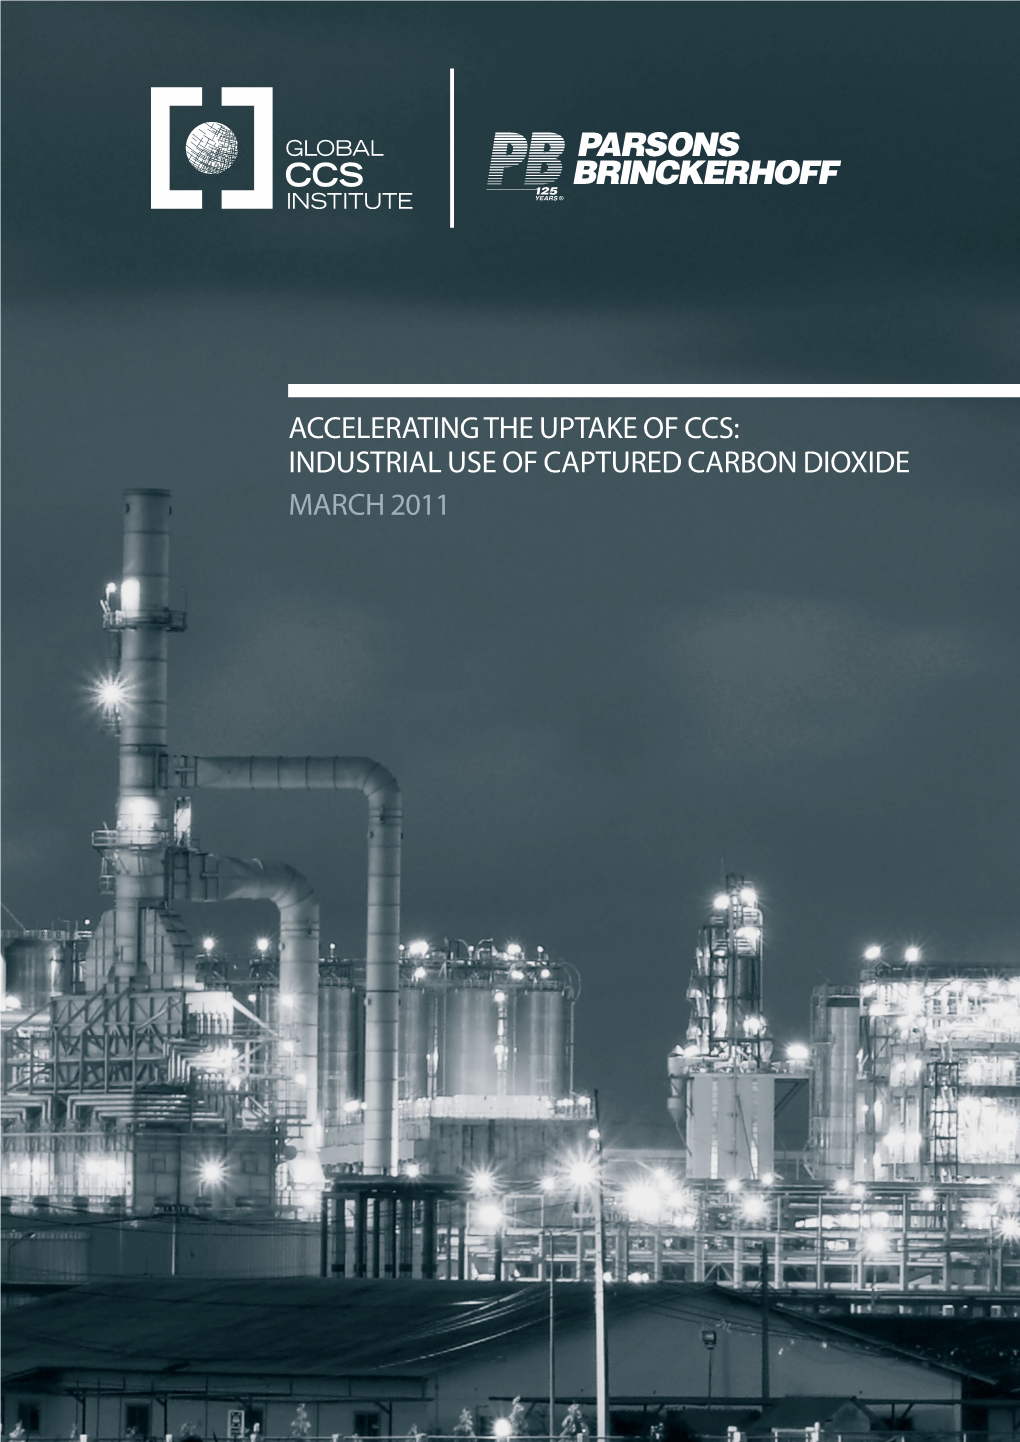 Accelerating the Uptake of Ccs: Industrial Use of Captured Carbon Dioxide March 2011